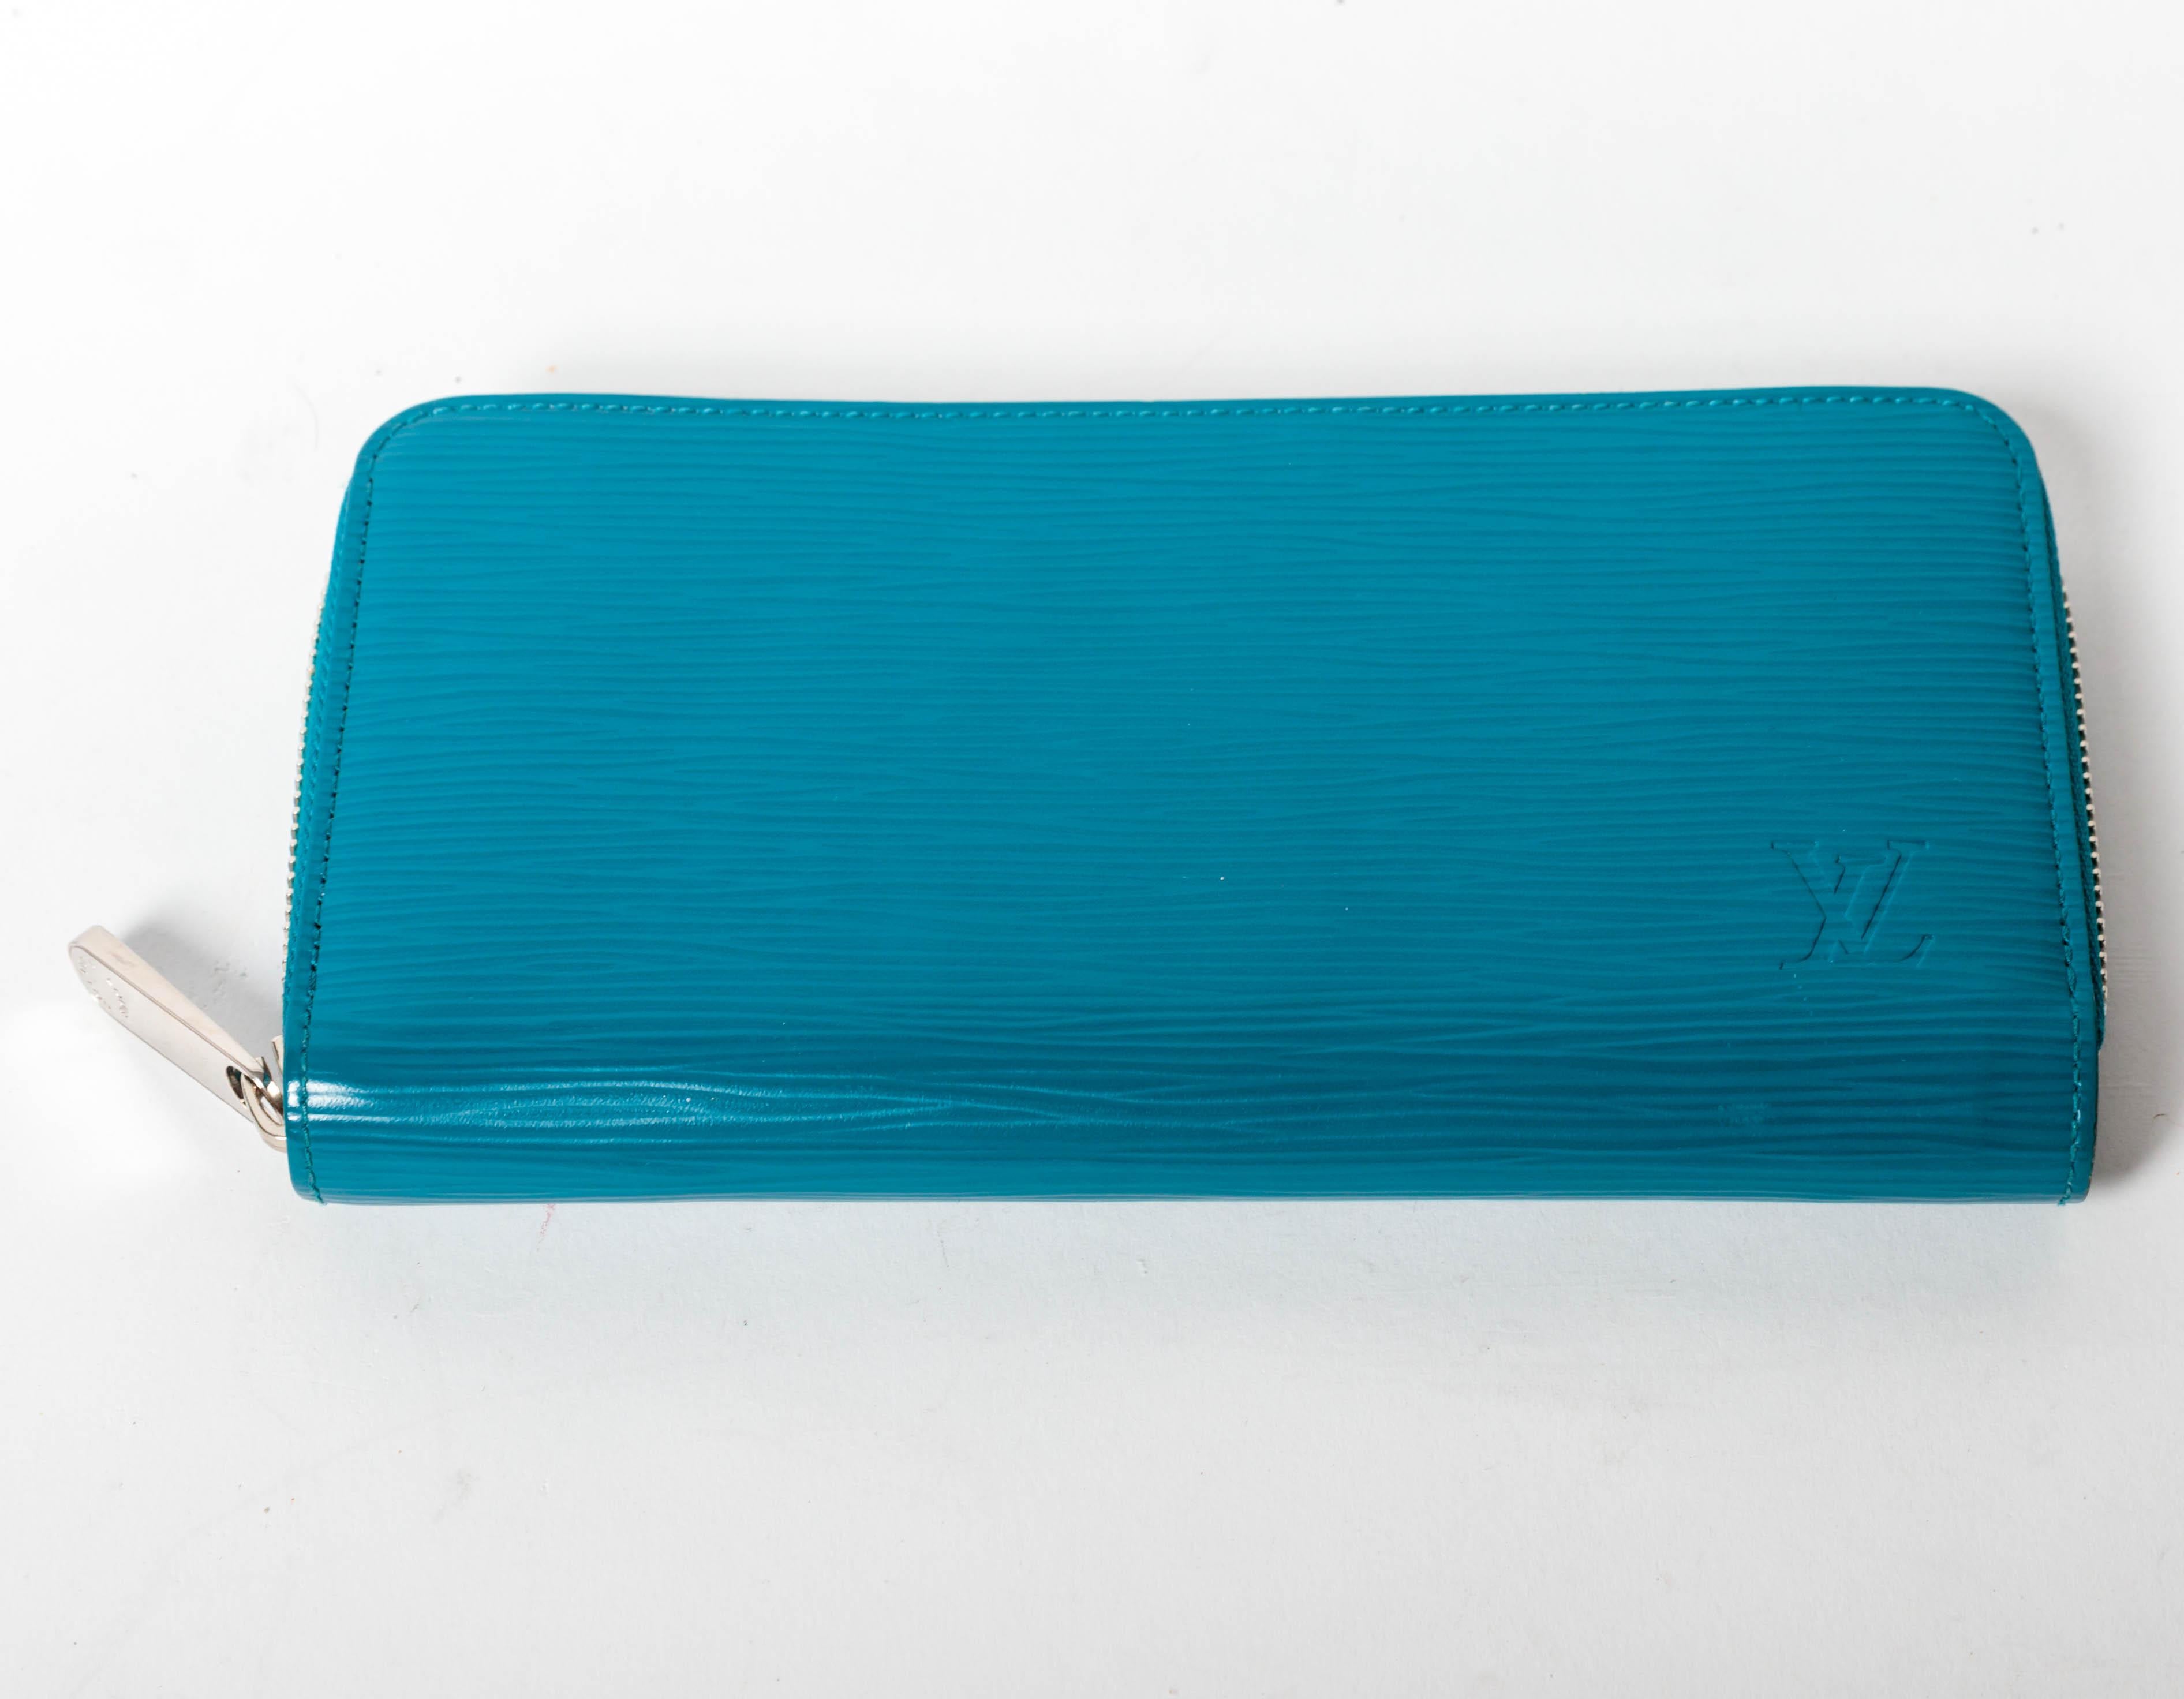 Cyan Epi leather Louis Vuitton Zippy Organizer wallet with silver hardware, dual interior pockets, one with zip closure.
Dual bill compartments, 8 card slots and zip around closure.
Condition is excellent.